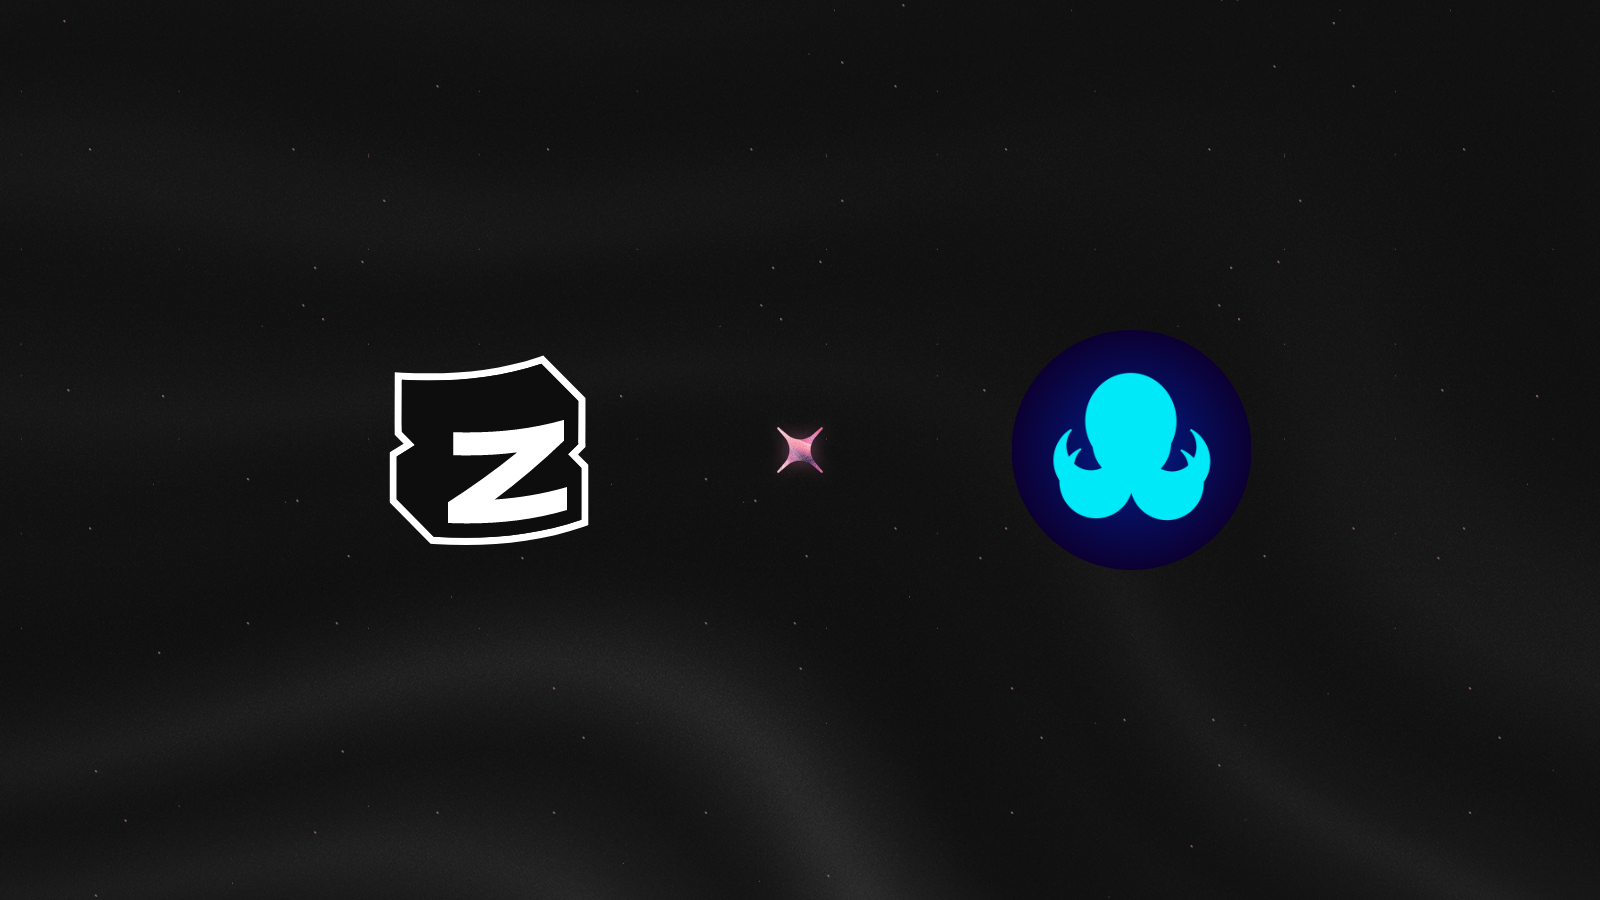 Zealy logo and ShimmerSea logo